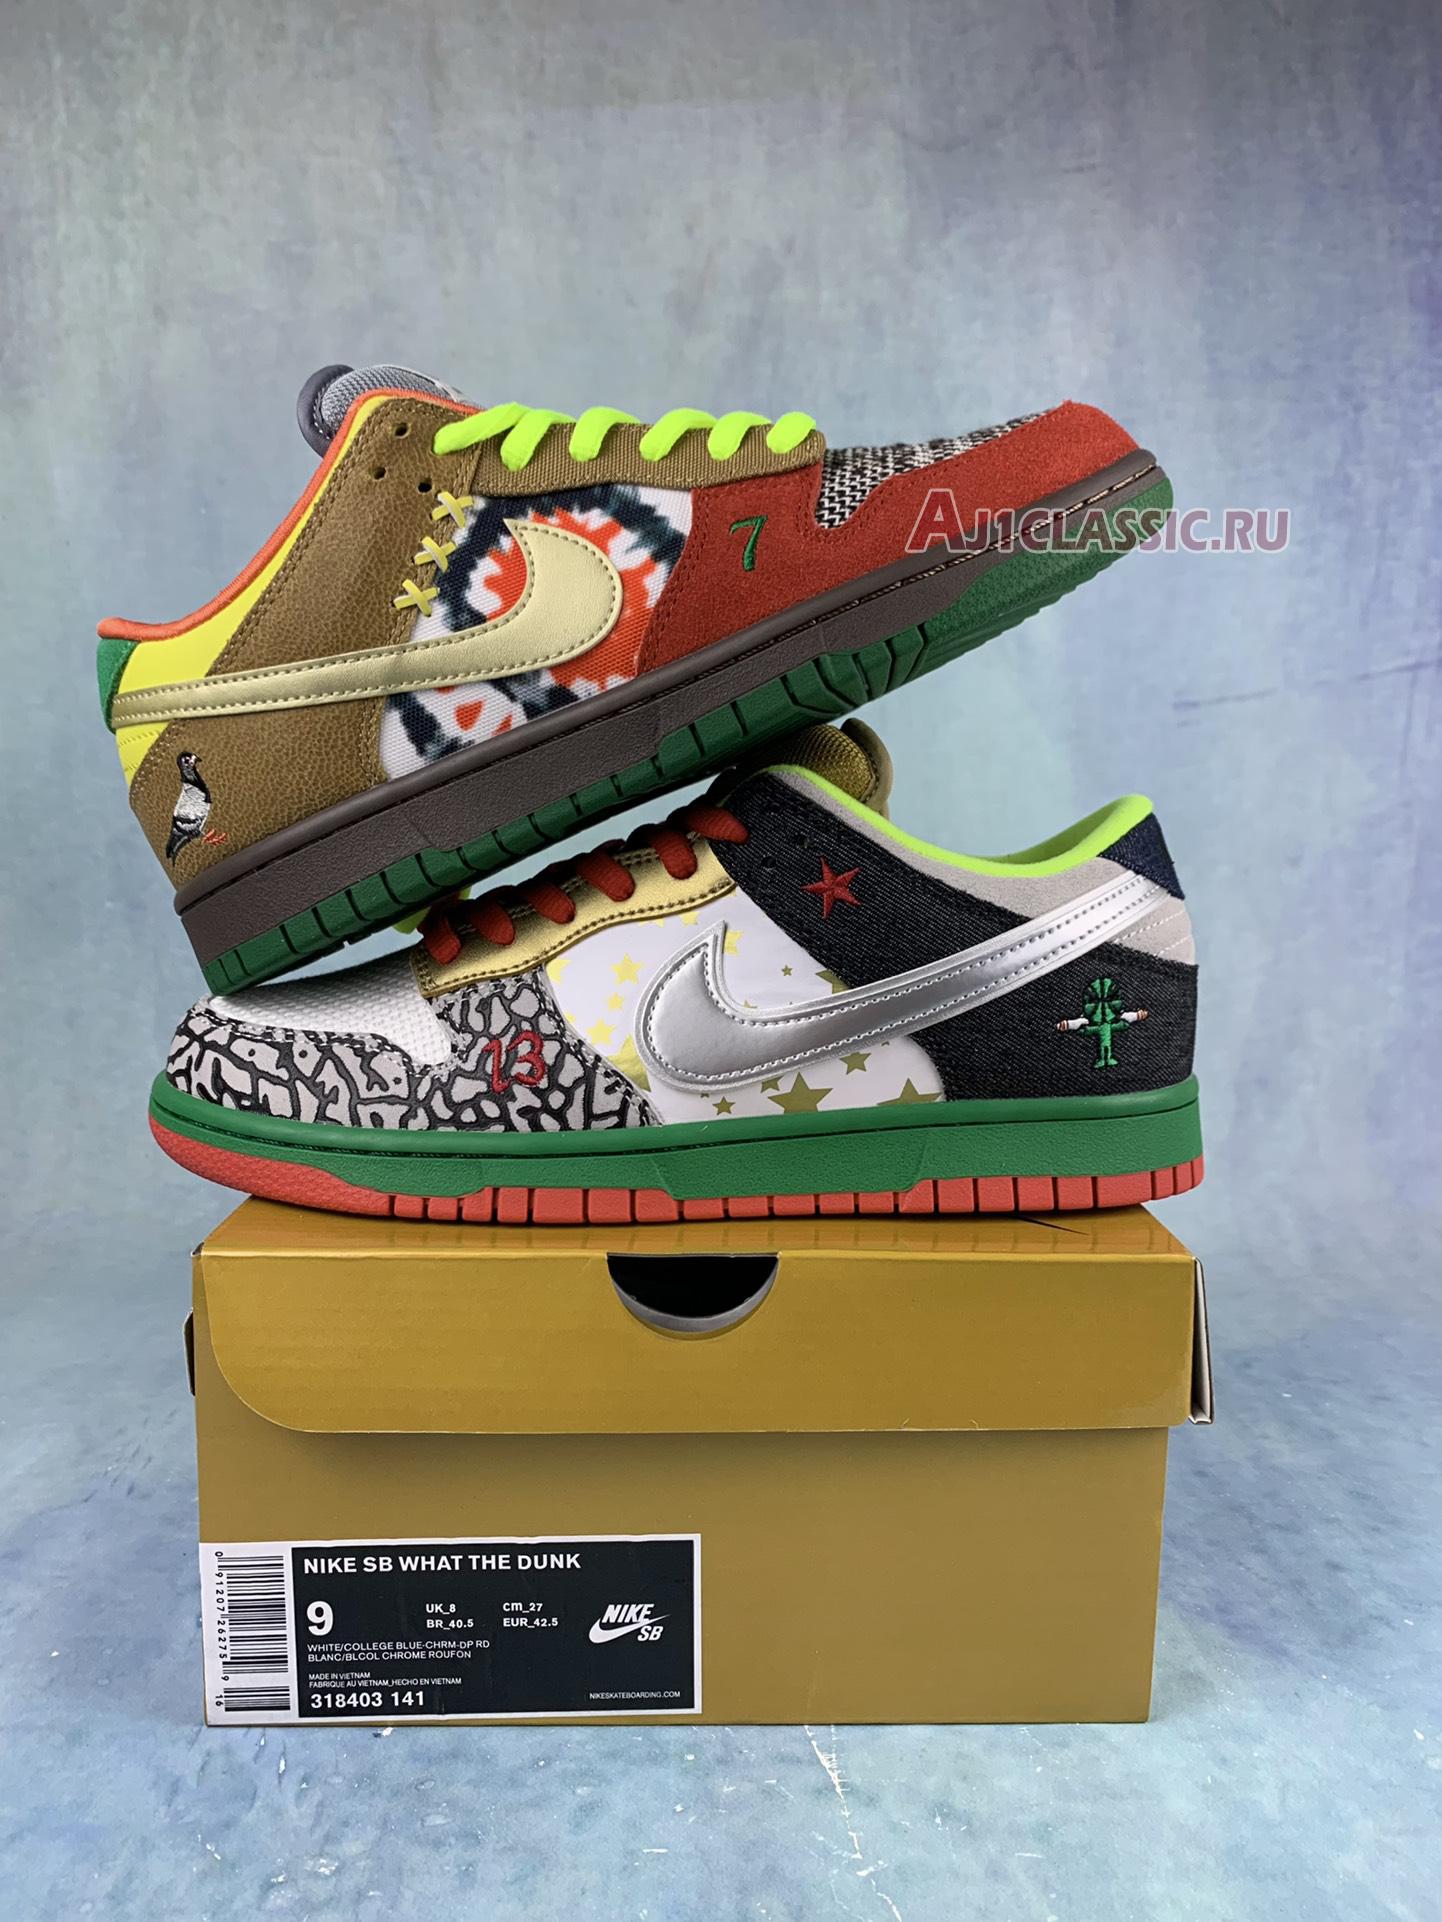 Nike Dunk Low SB "What The Dunk" 318403-141